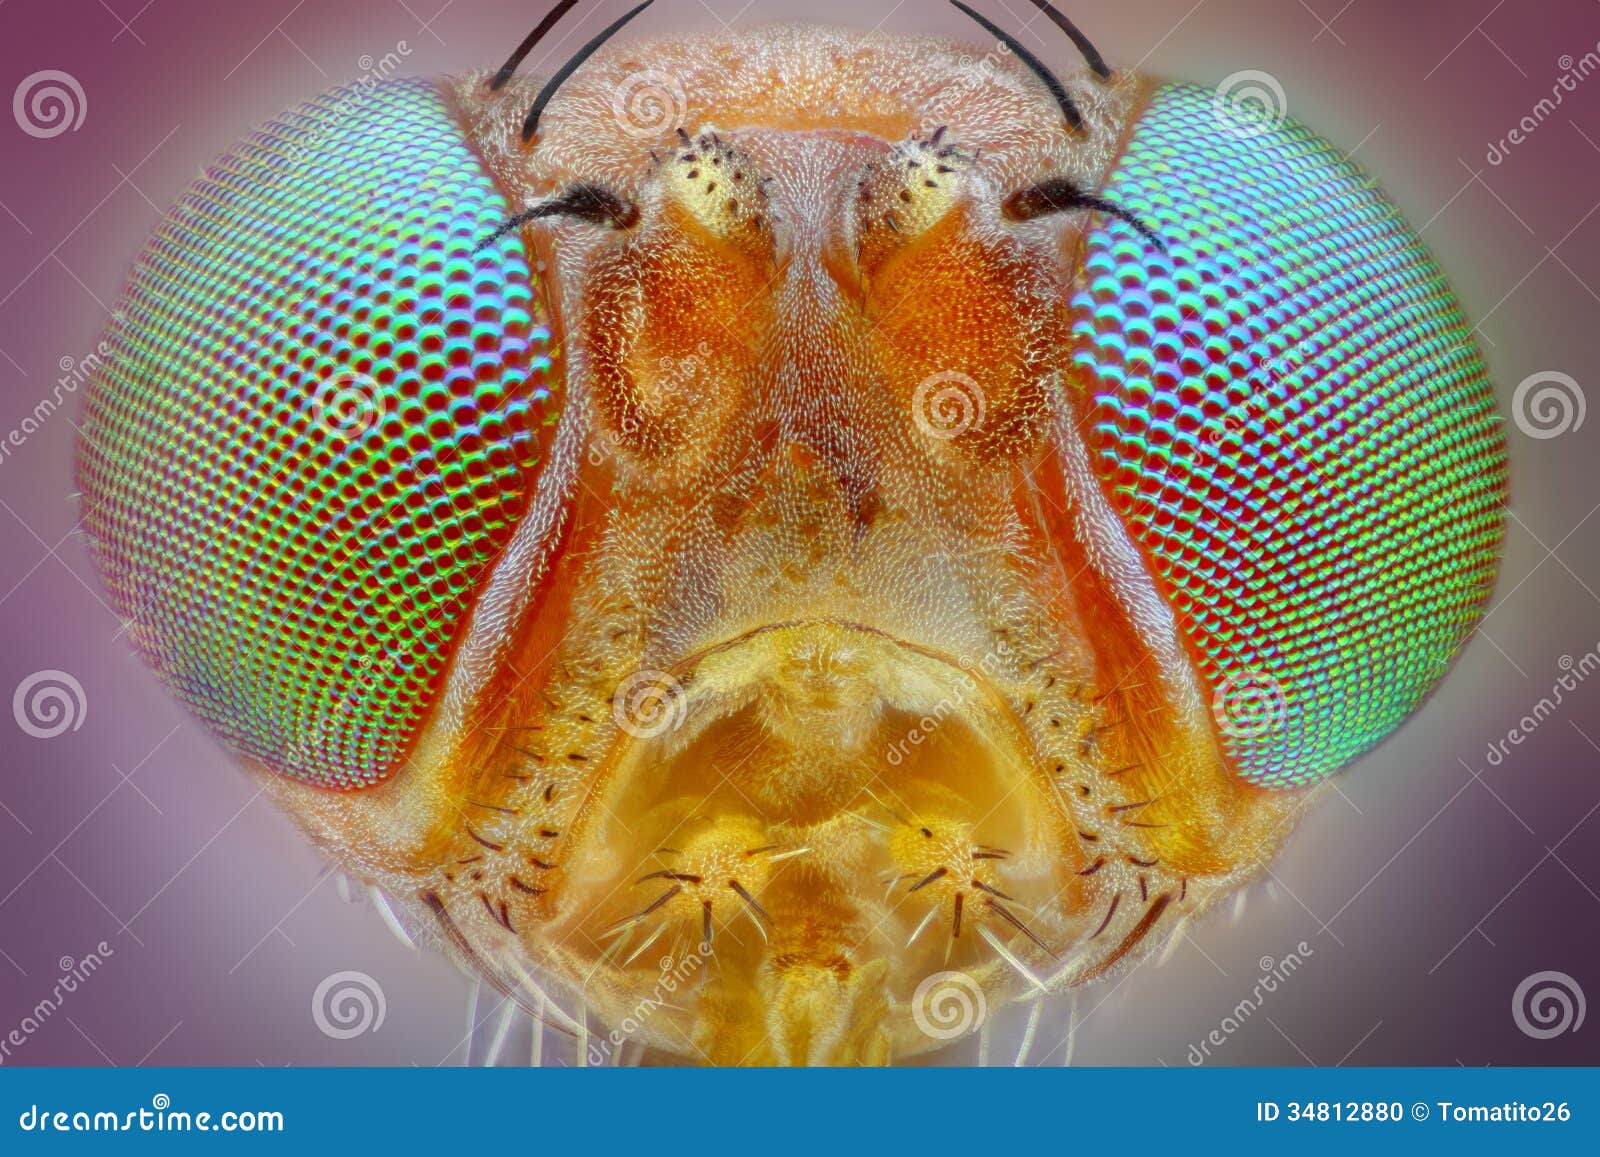 fly head taken with 25x microscope objective